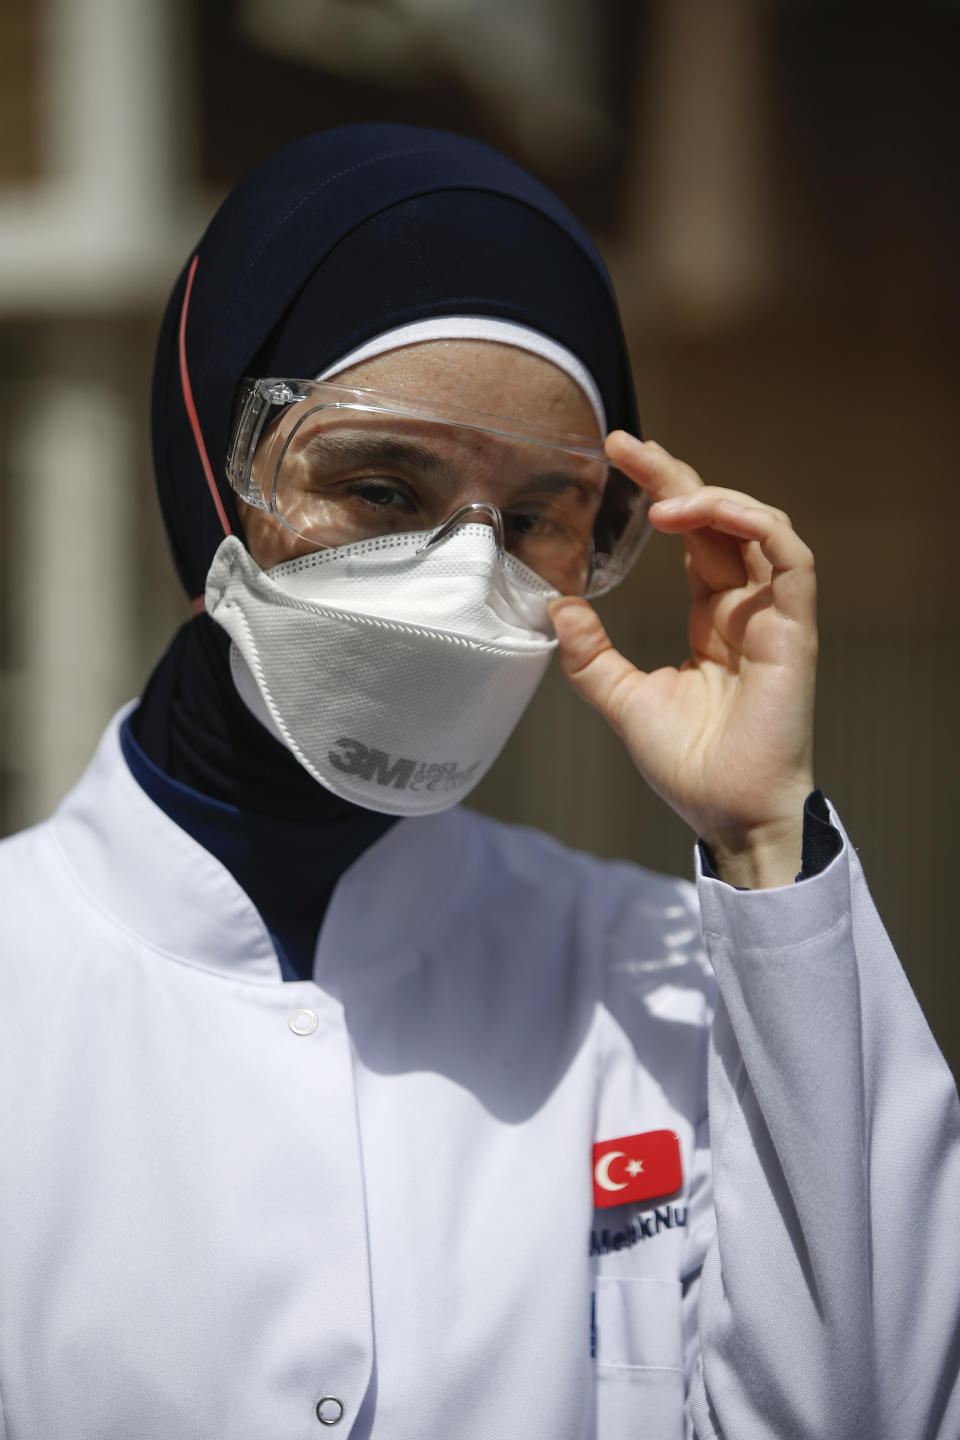 In this Friday, May 15, 2020 photo, Dr. Melek Nur Aslan, the local health director for Fatih, a large district in the historic peninsula of Istanbul adjusts her goggles as she prepares to deploy a team of contact tracers with Turkey's Health Ministry's coronavirus contact tracing team. Teams of contact tracers in Istanbul, the epicenter of the pandemic in Turkey and its most populous city, and also nationwide, are going house to house to test people experiencing COVID-19 symptoms and inform patients on isolation. (AP Photo/Emrah Gurel)